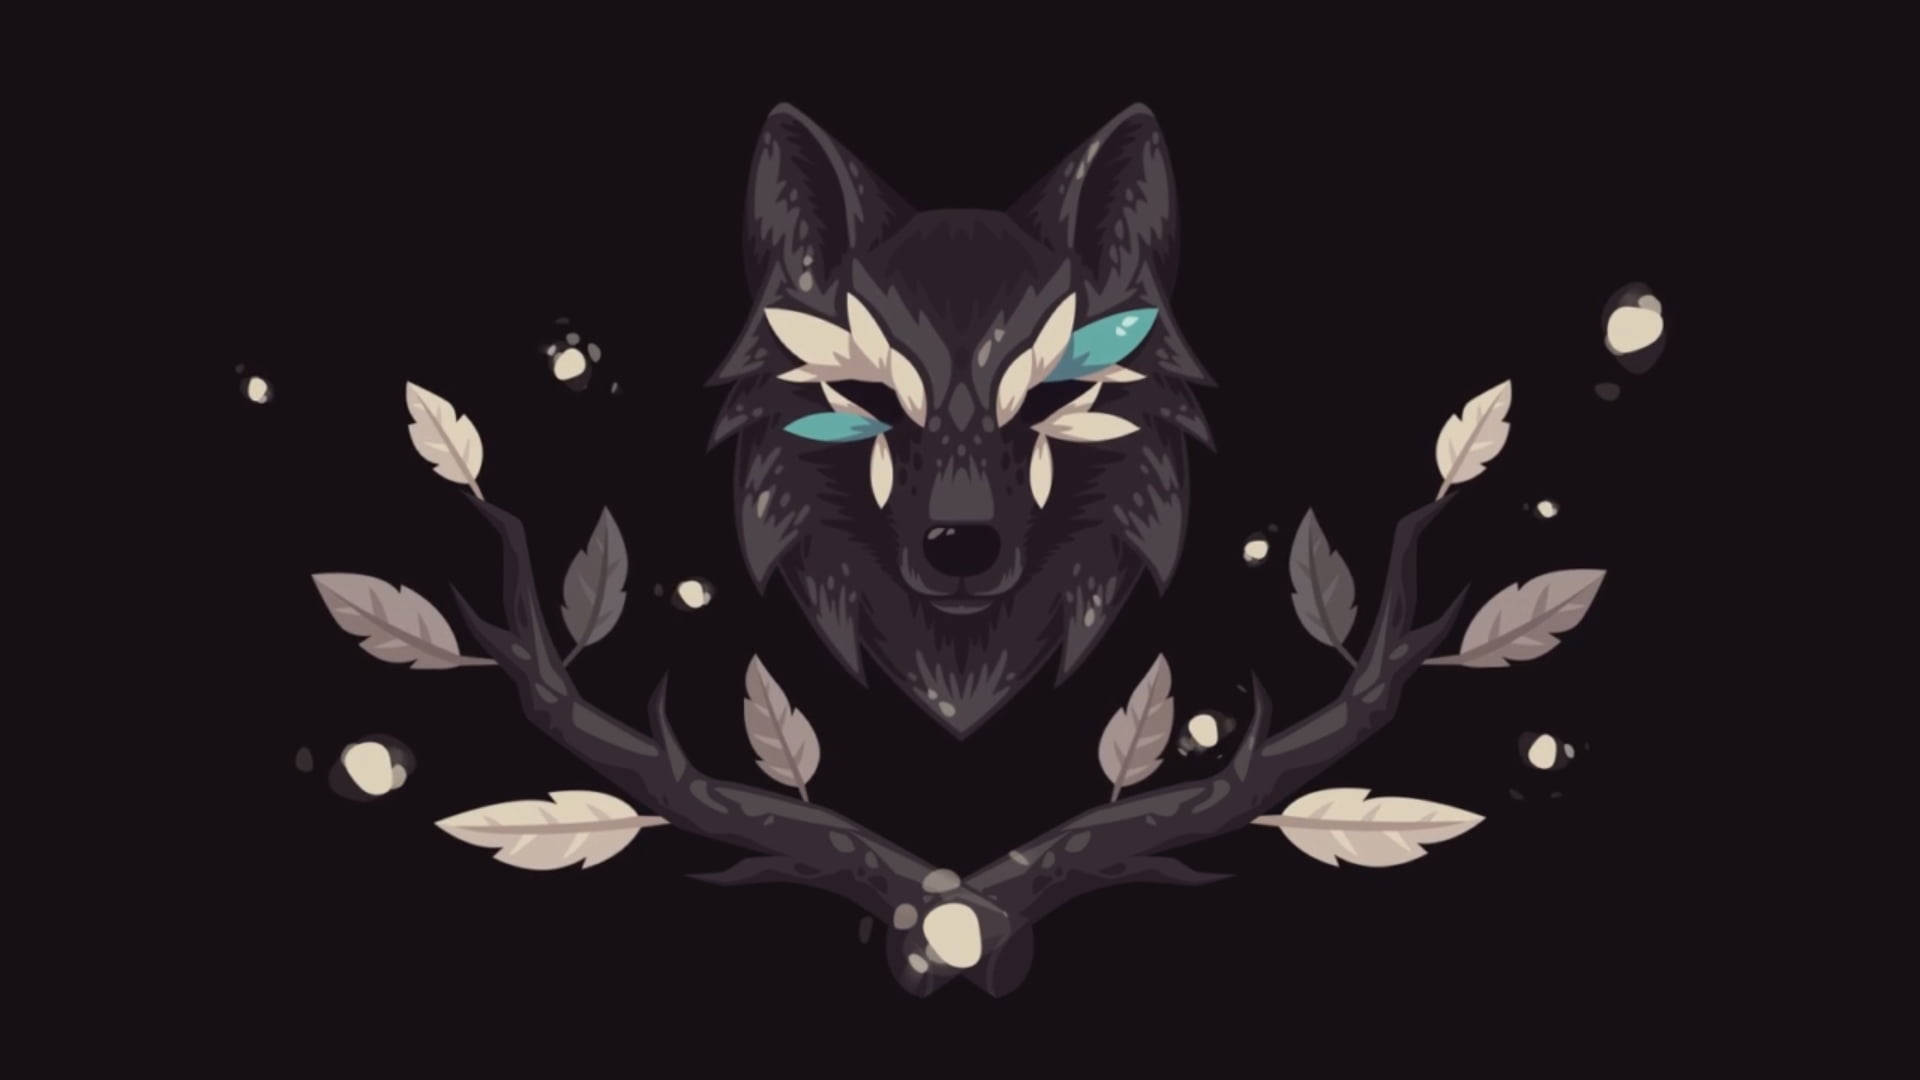 Cool Black Wolf On Magical Branches